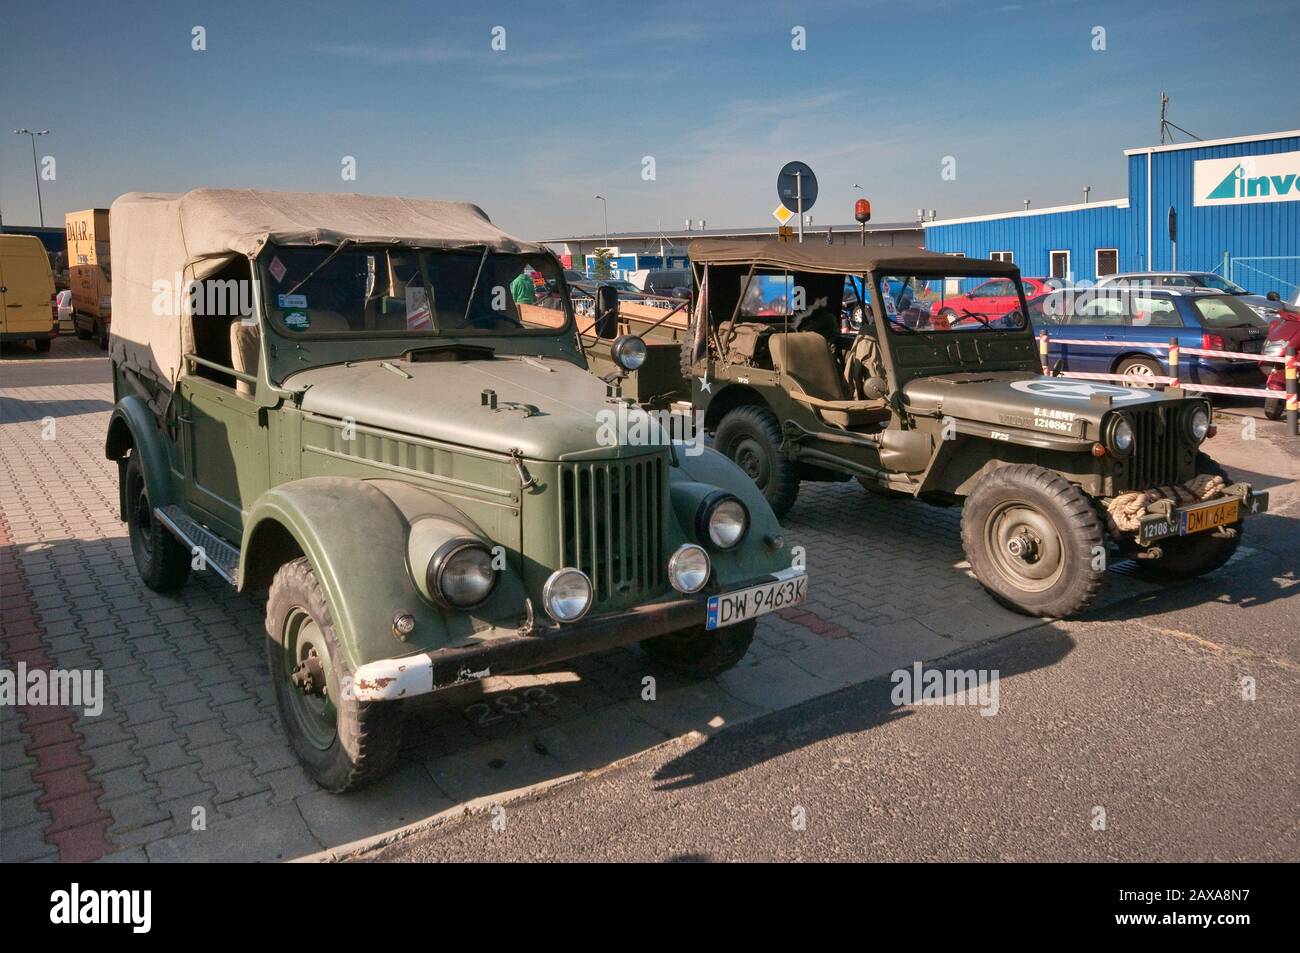 1950's GAZ-69, Soviet light truck and WW2 American Willys MB jeep, Oldtimer Bazar fair in Wroclaw, Lower Silesia, Poland Stock Photo